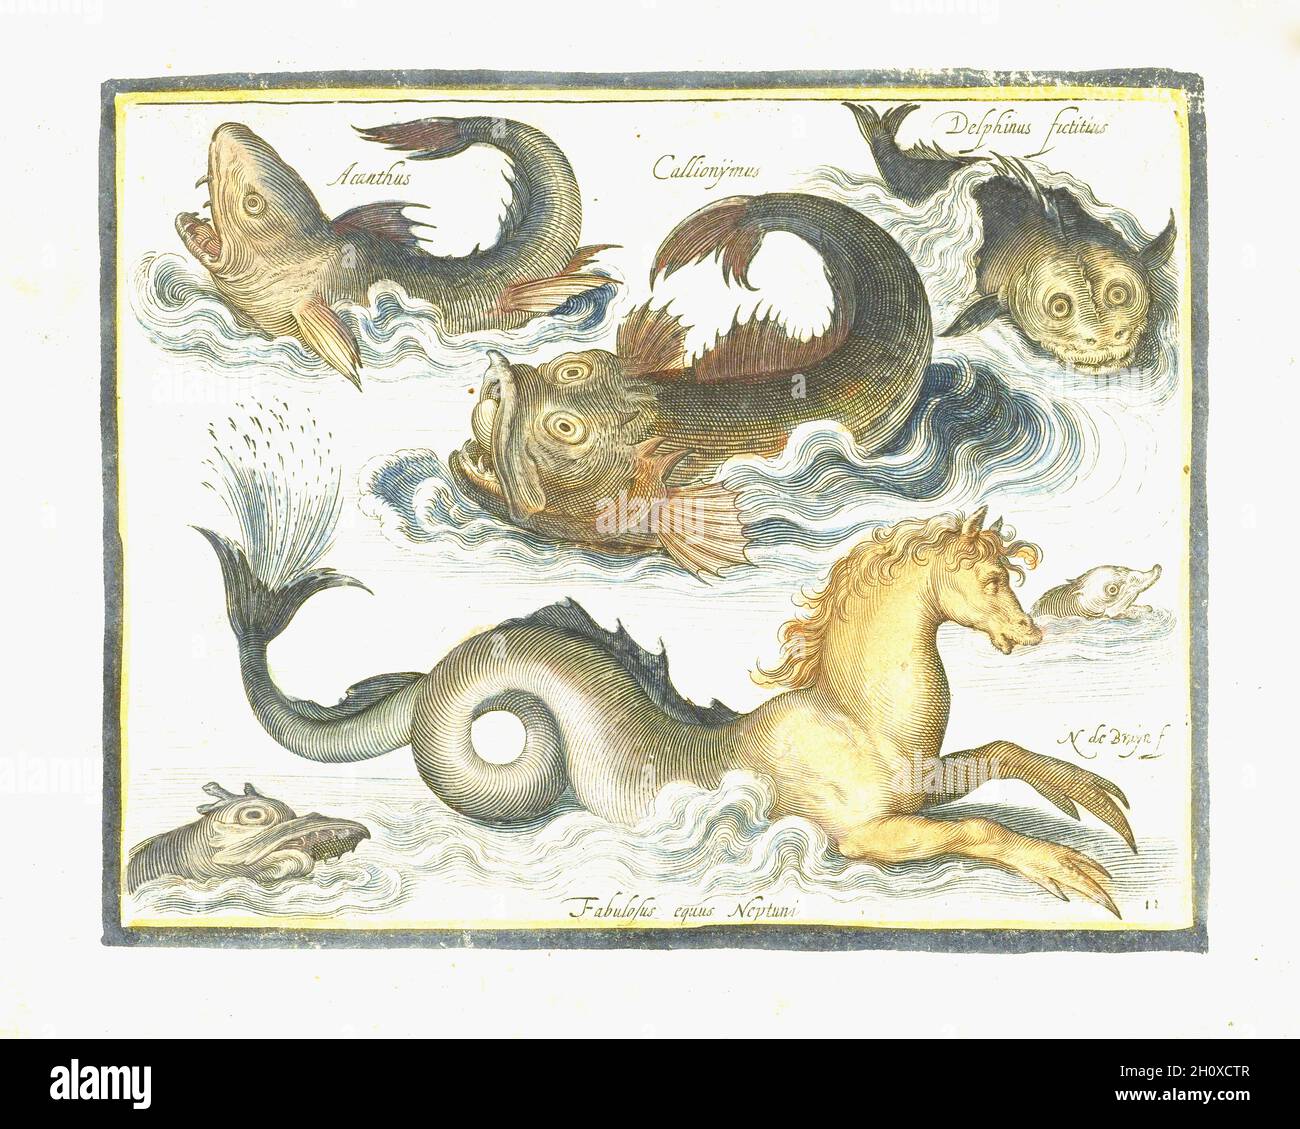 Nicolaes de Bruyn - Seahorse and Imaginary Aquatic Creatures - late 1500's-early 1600's Stock Photo